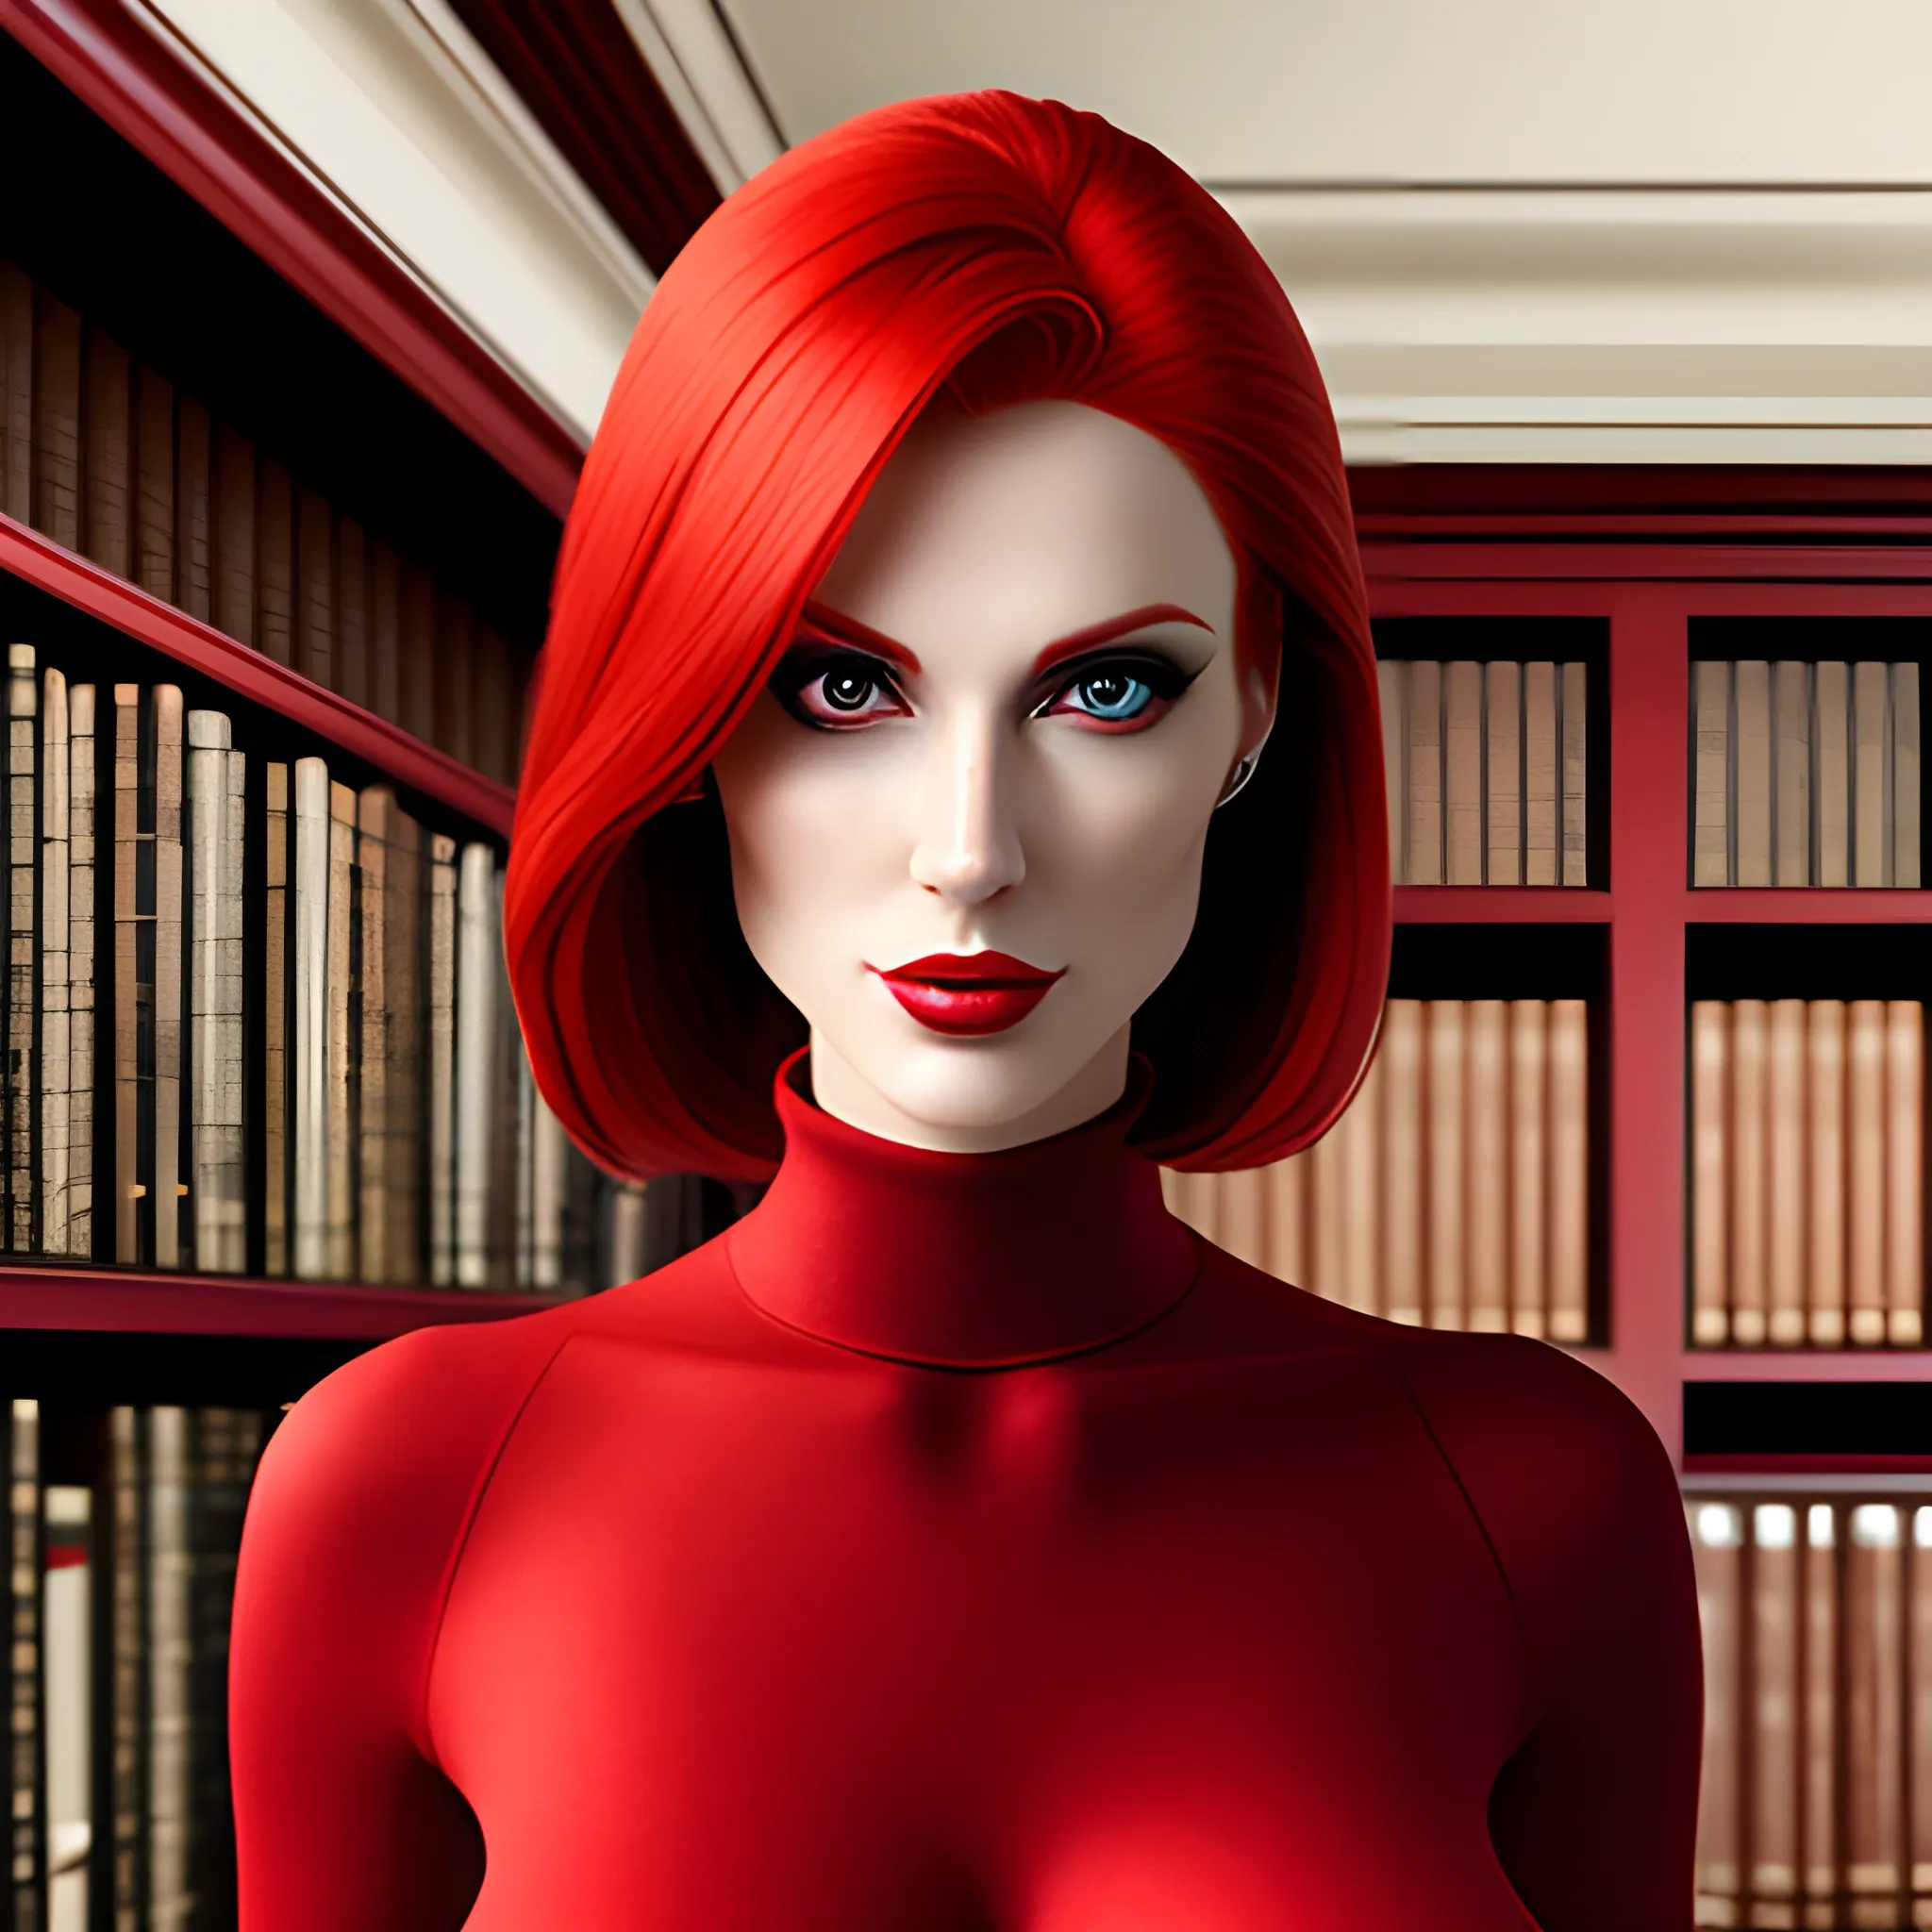 Create a photorealistic image of a red-haired female child with and a red turtleneck with a cutout in it's center, standing in a library. Pretty eyes, sexy mouth, whole body visible, lots of skin, maximum details